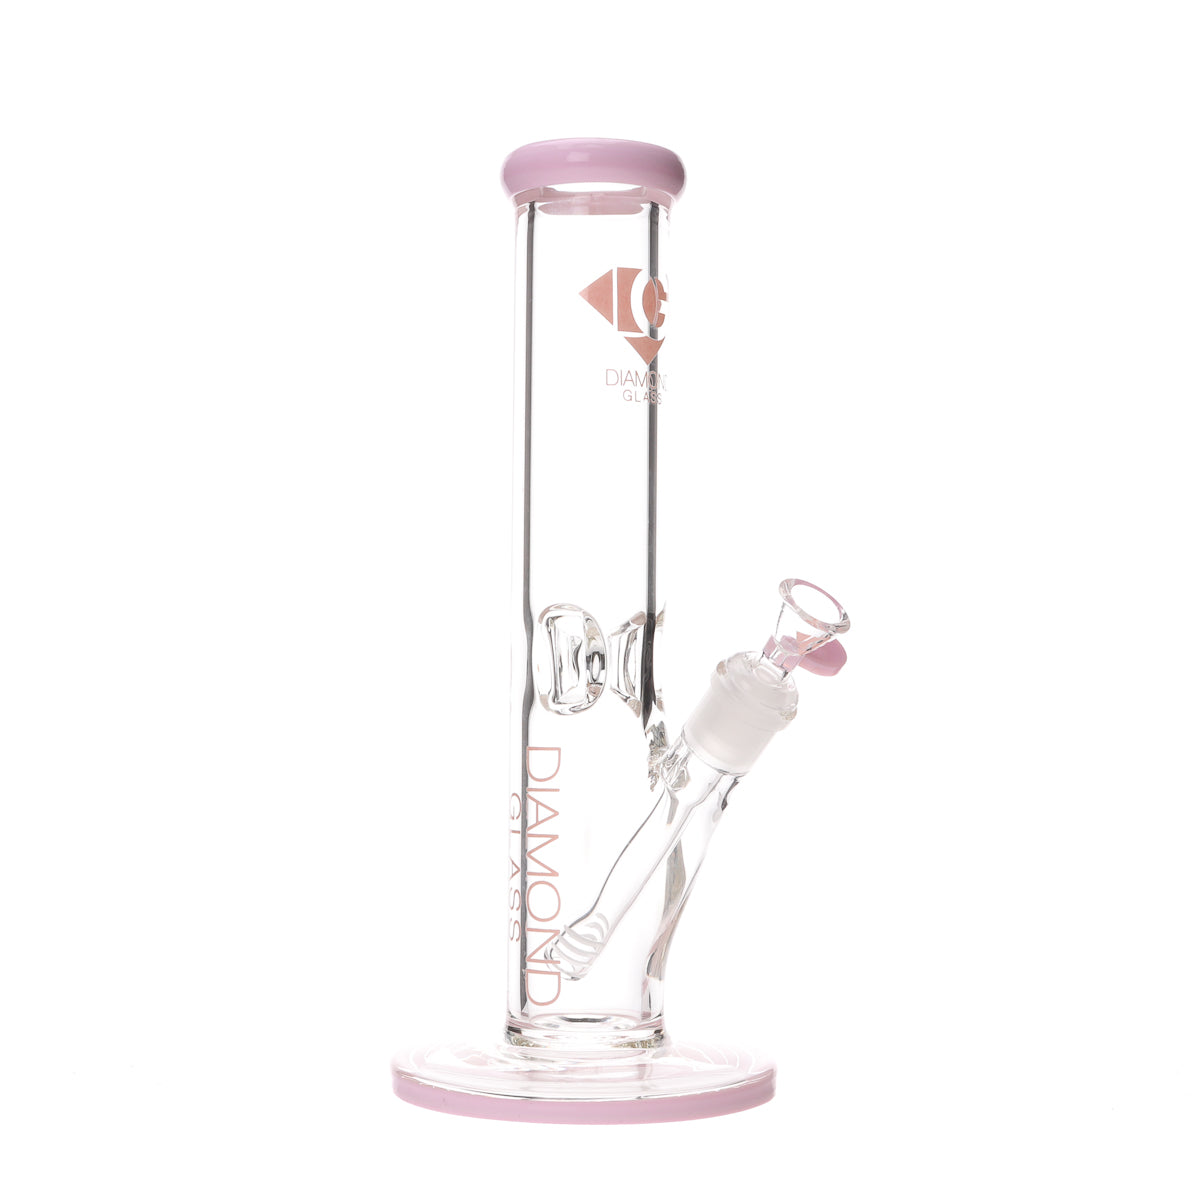 Diamond Glass Straight Tube Bong Pink Accents